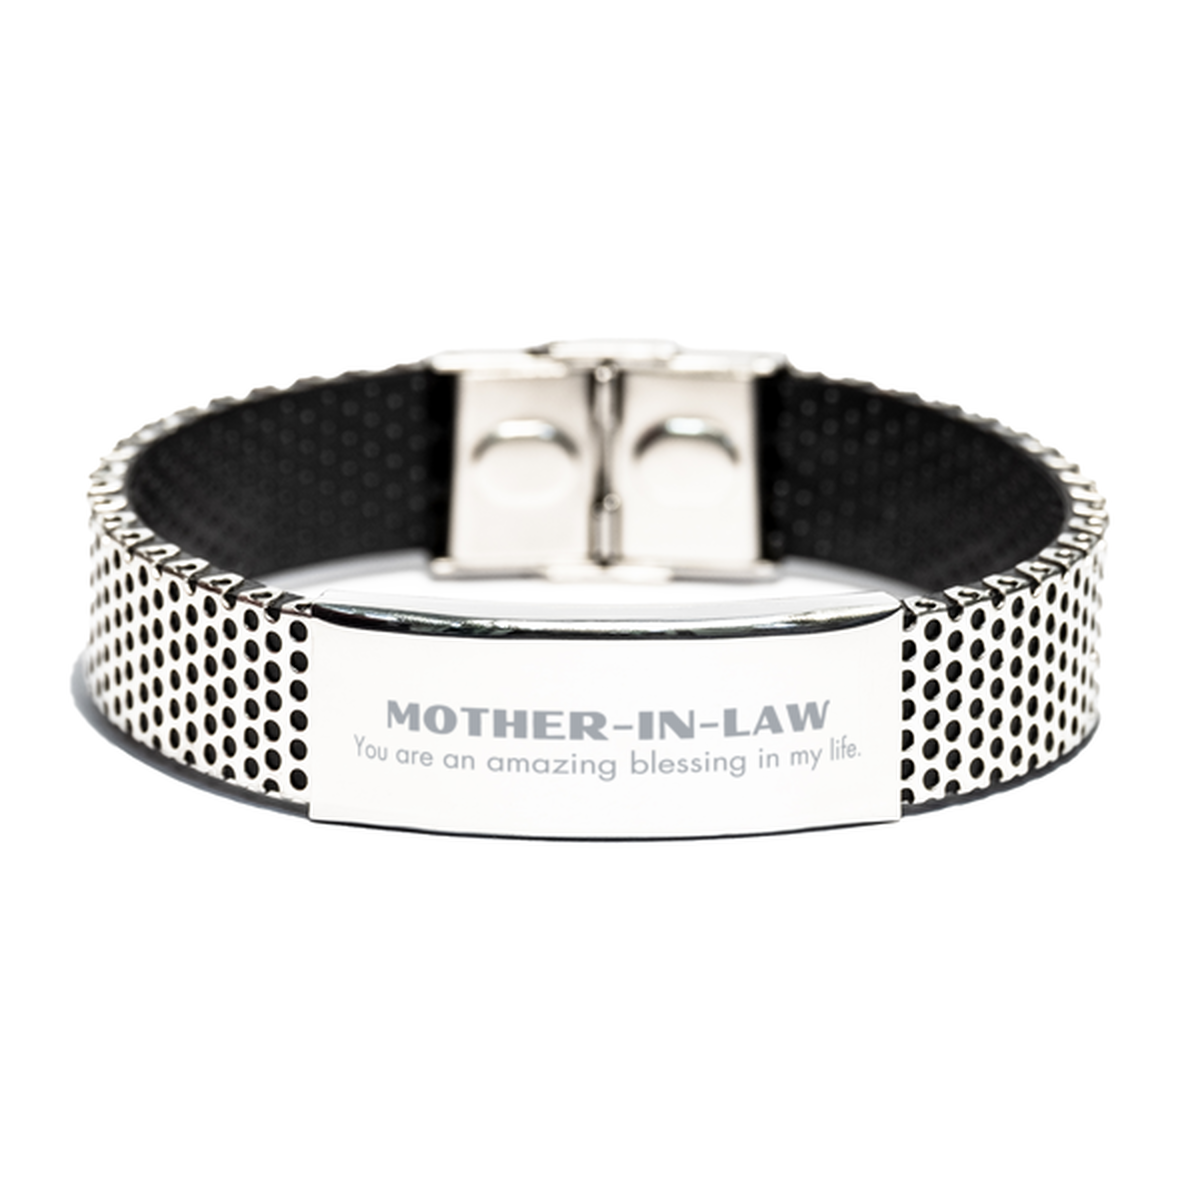 Mother-In-Law Stainless Steel Bracelet, You are an amazing blessing in my life, Thank You Gifts For Mother-In-Law, Inspirational Birthday Christmas Unique Gifts For Mother-In-Law